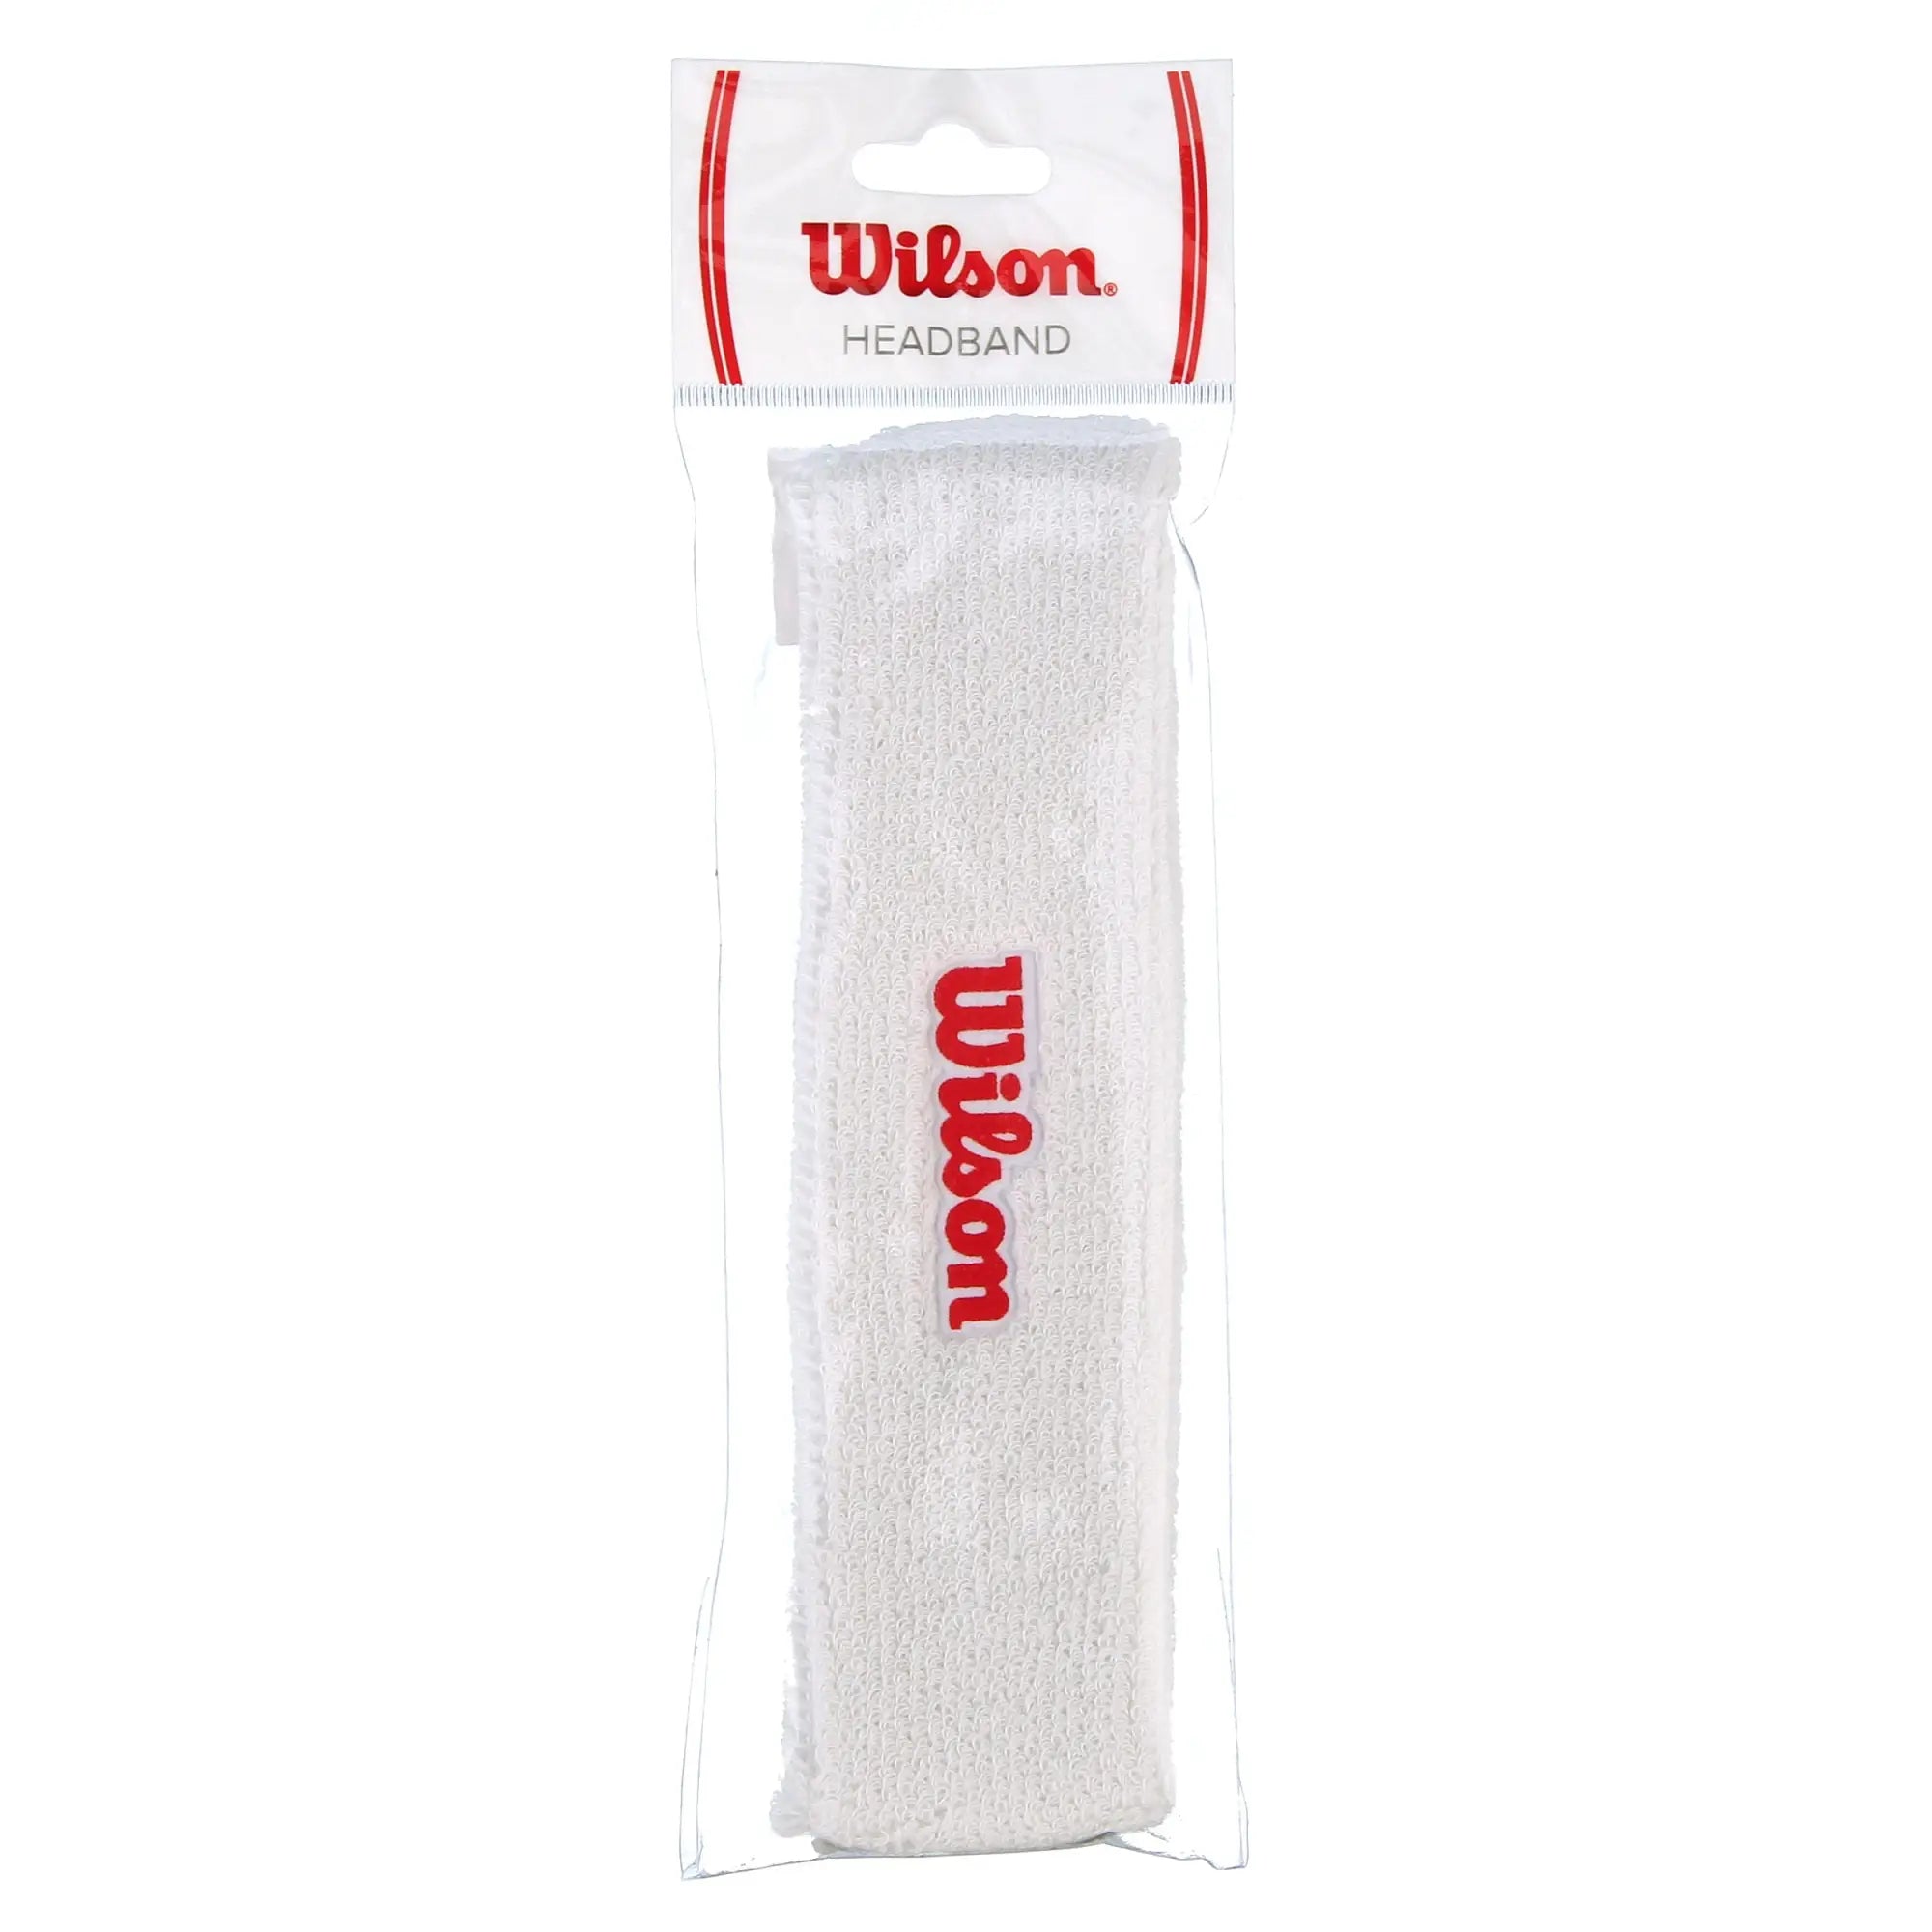 Wilson Headband Soaks up Perspiration One Size Fits Most - MISCELLANEOUS ITEMS